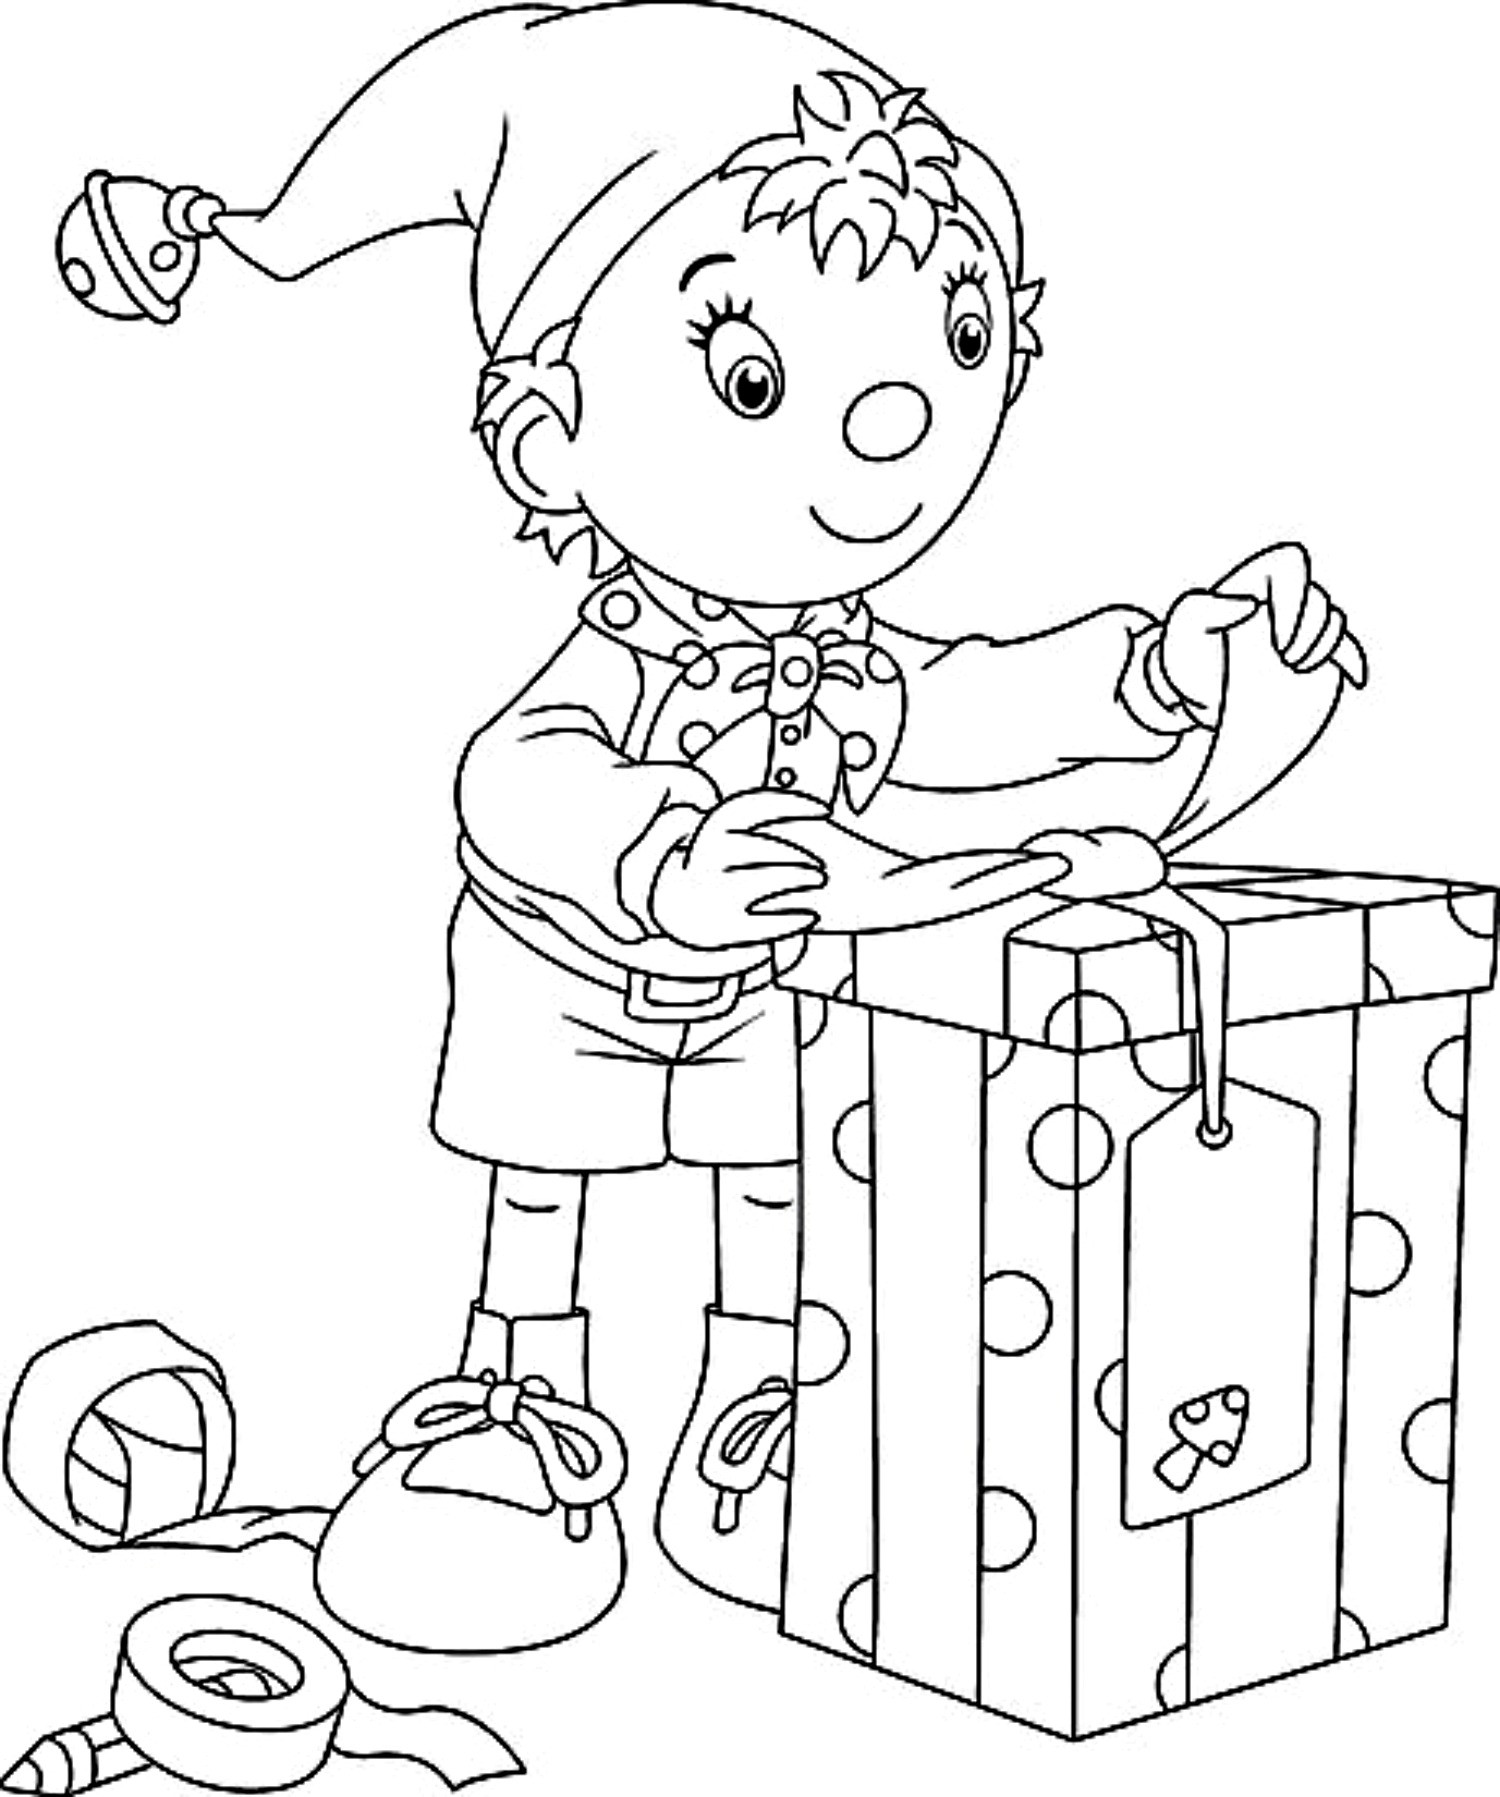 Kindergarten Coloring Pages Printable
 Free Printable Kindergarten Coloring Pages For Kids